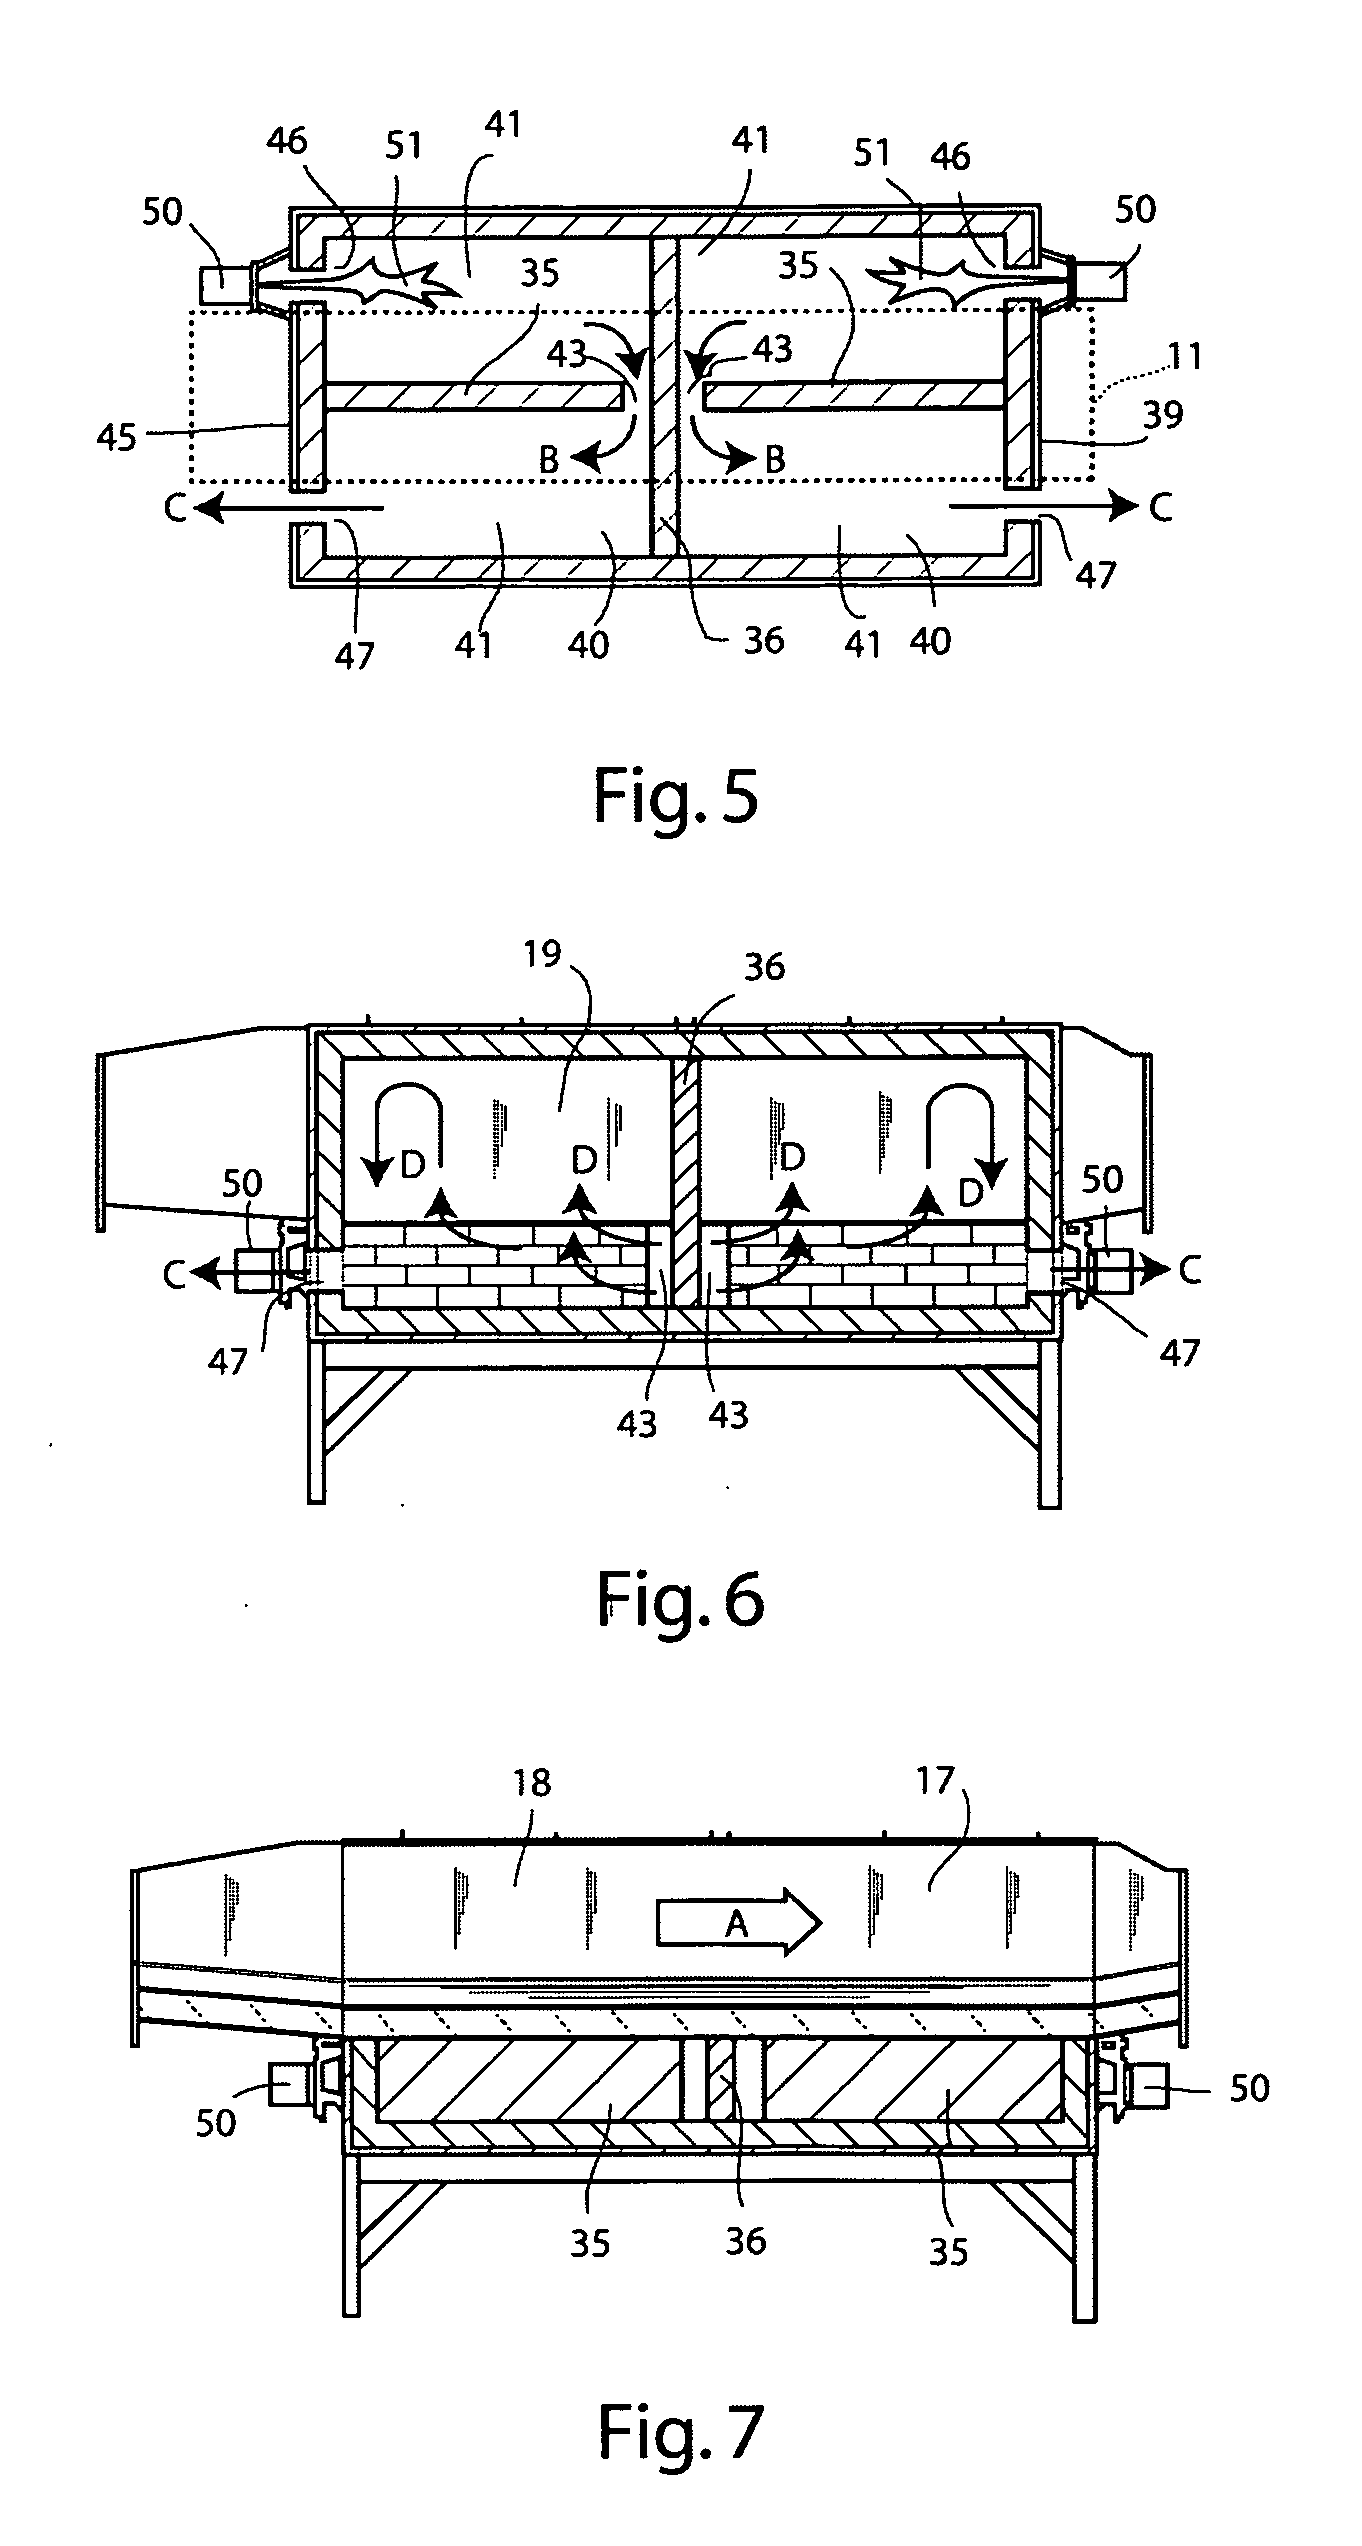 Method of and apparatus for conveying molten metals while providing heat thereto